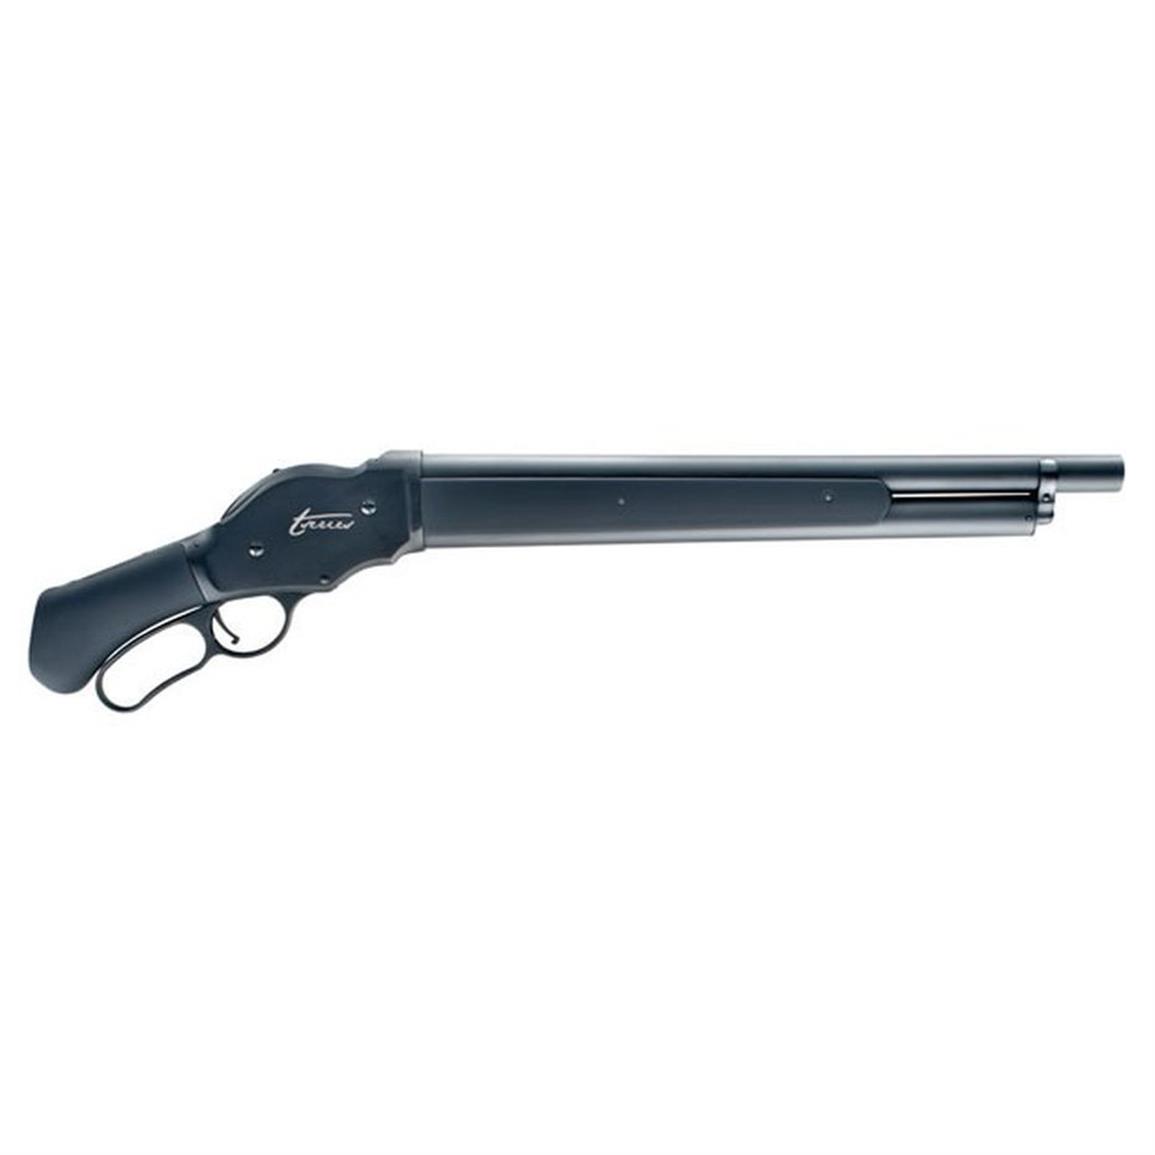 Taylor's & Co. Chiappa 1887 T-Model, Lever Action, 12 Gauge, 18.5" Barrel, 5+1 Rounds